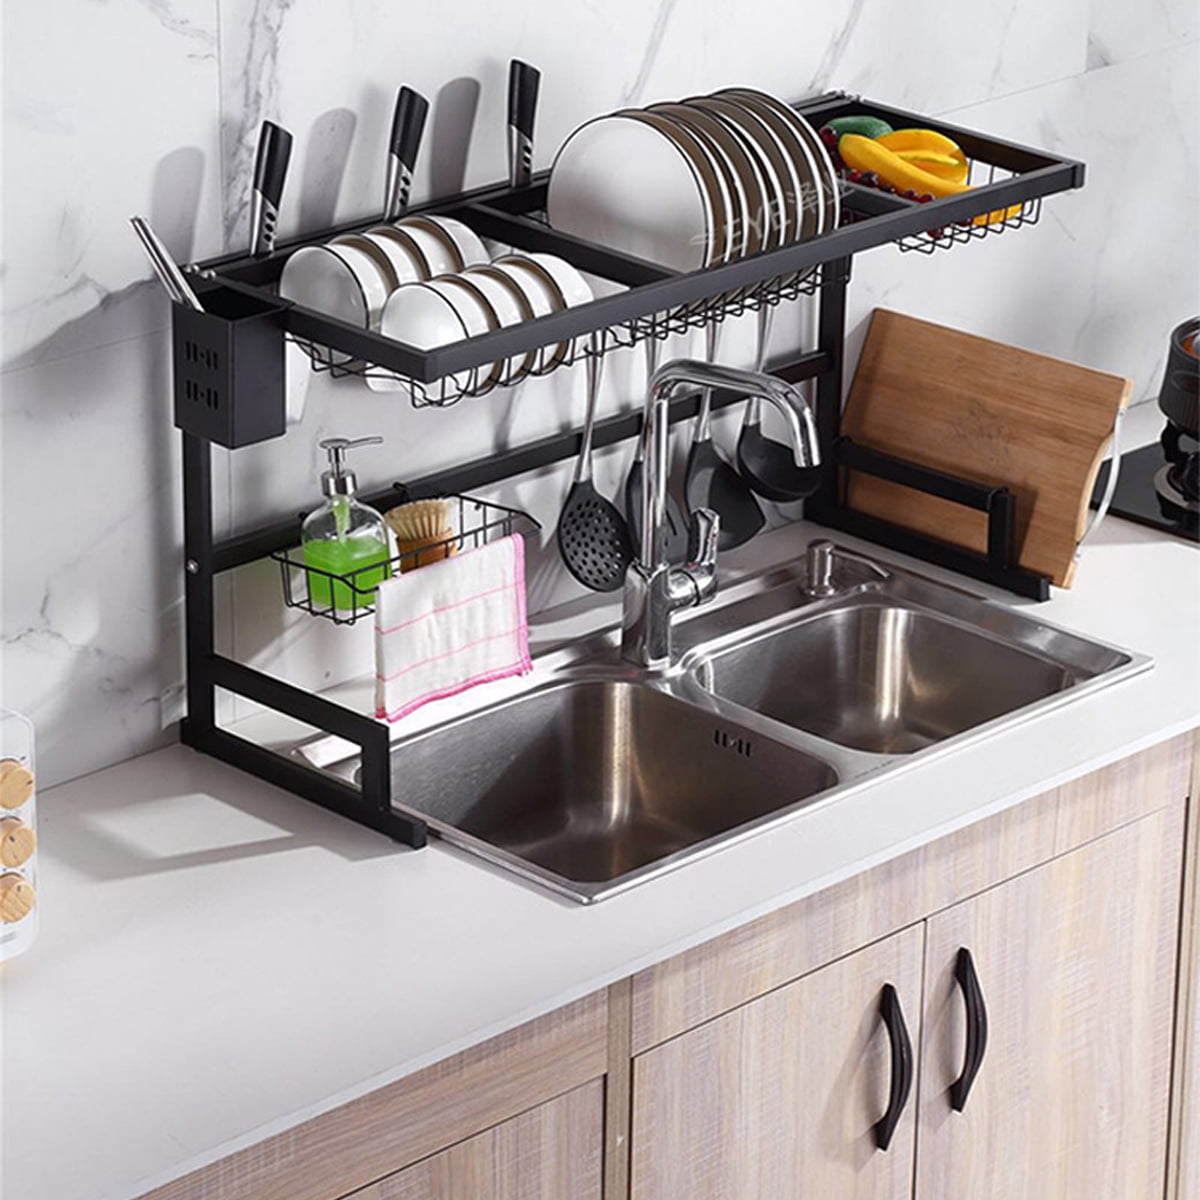 Details about   Stainless Steel Dish Drying Rack Over Sink Large Kitchen Storage Holder Drainer 